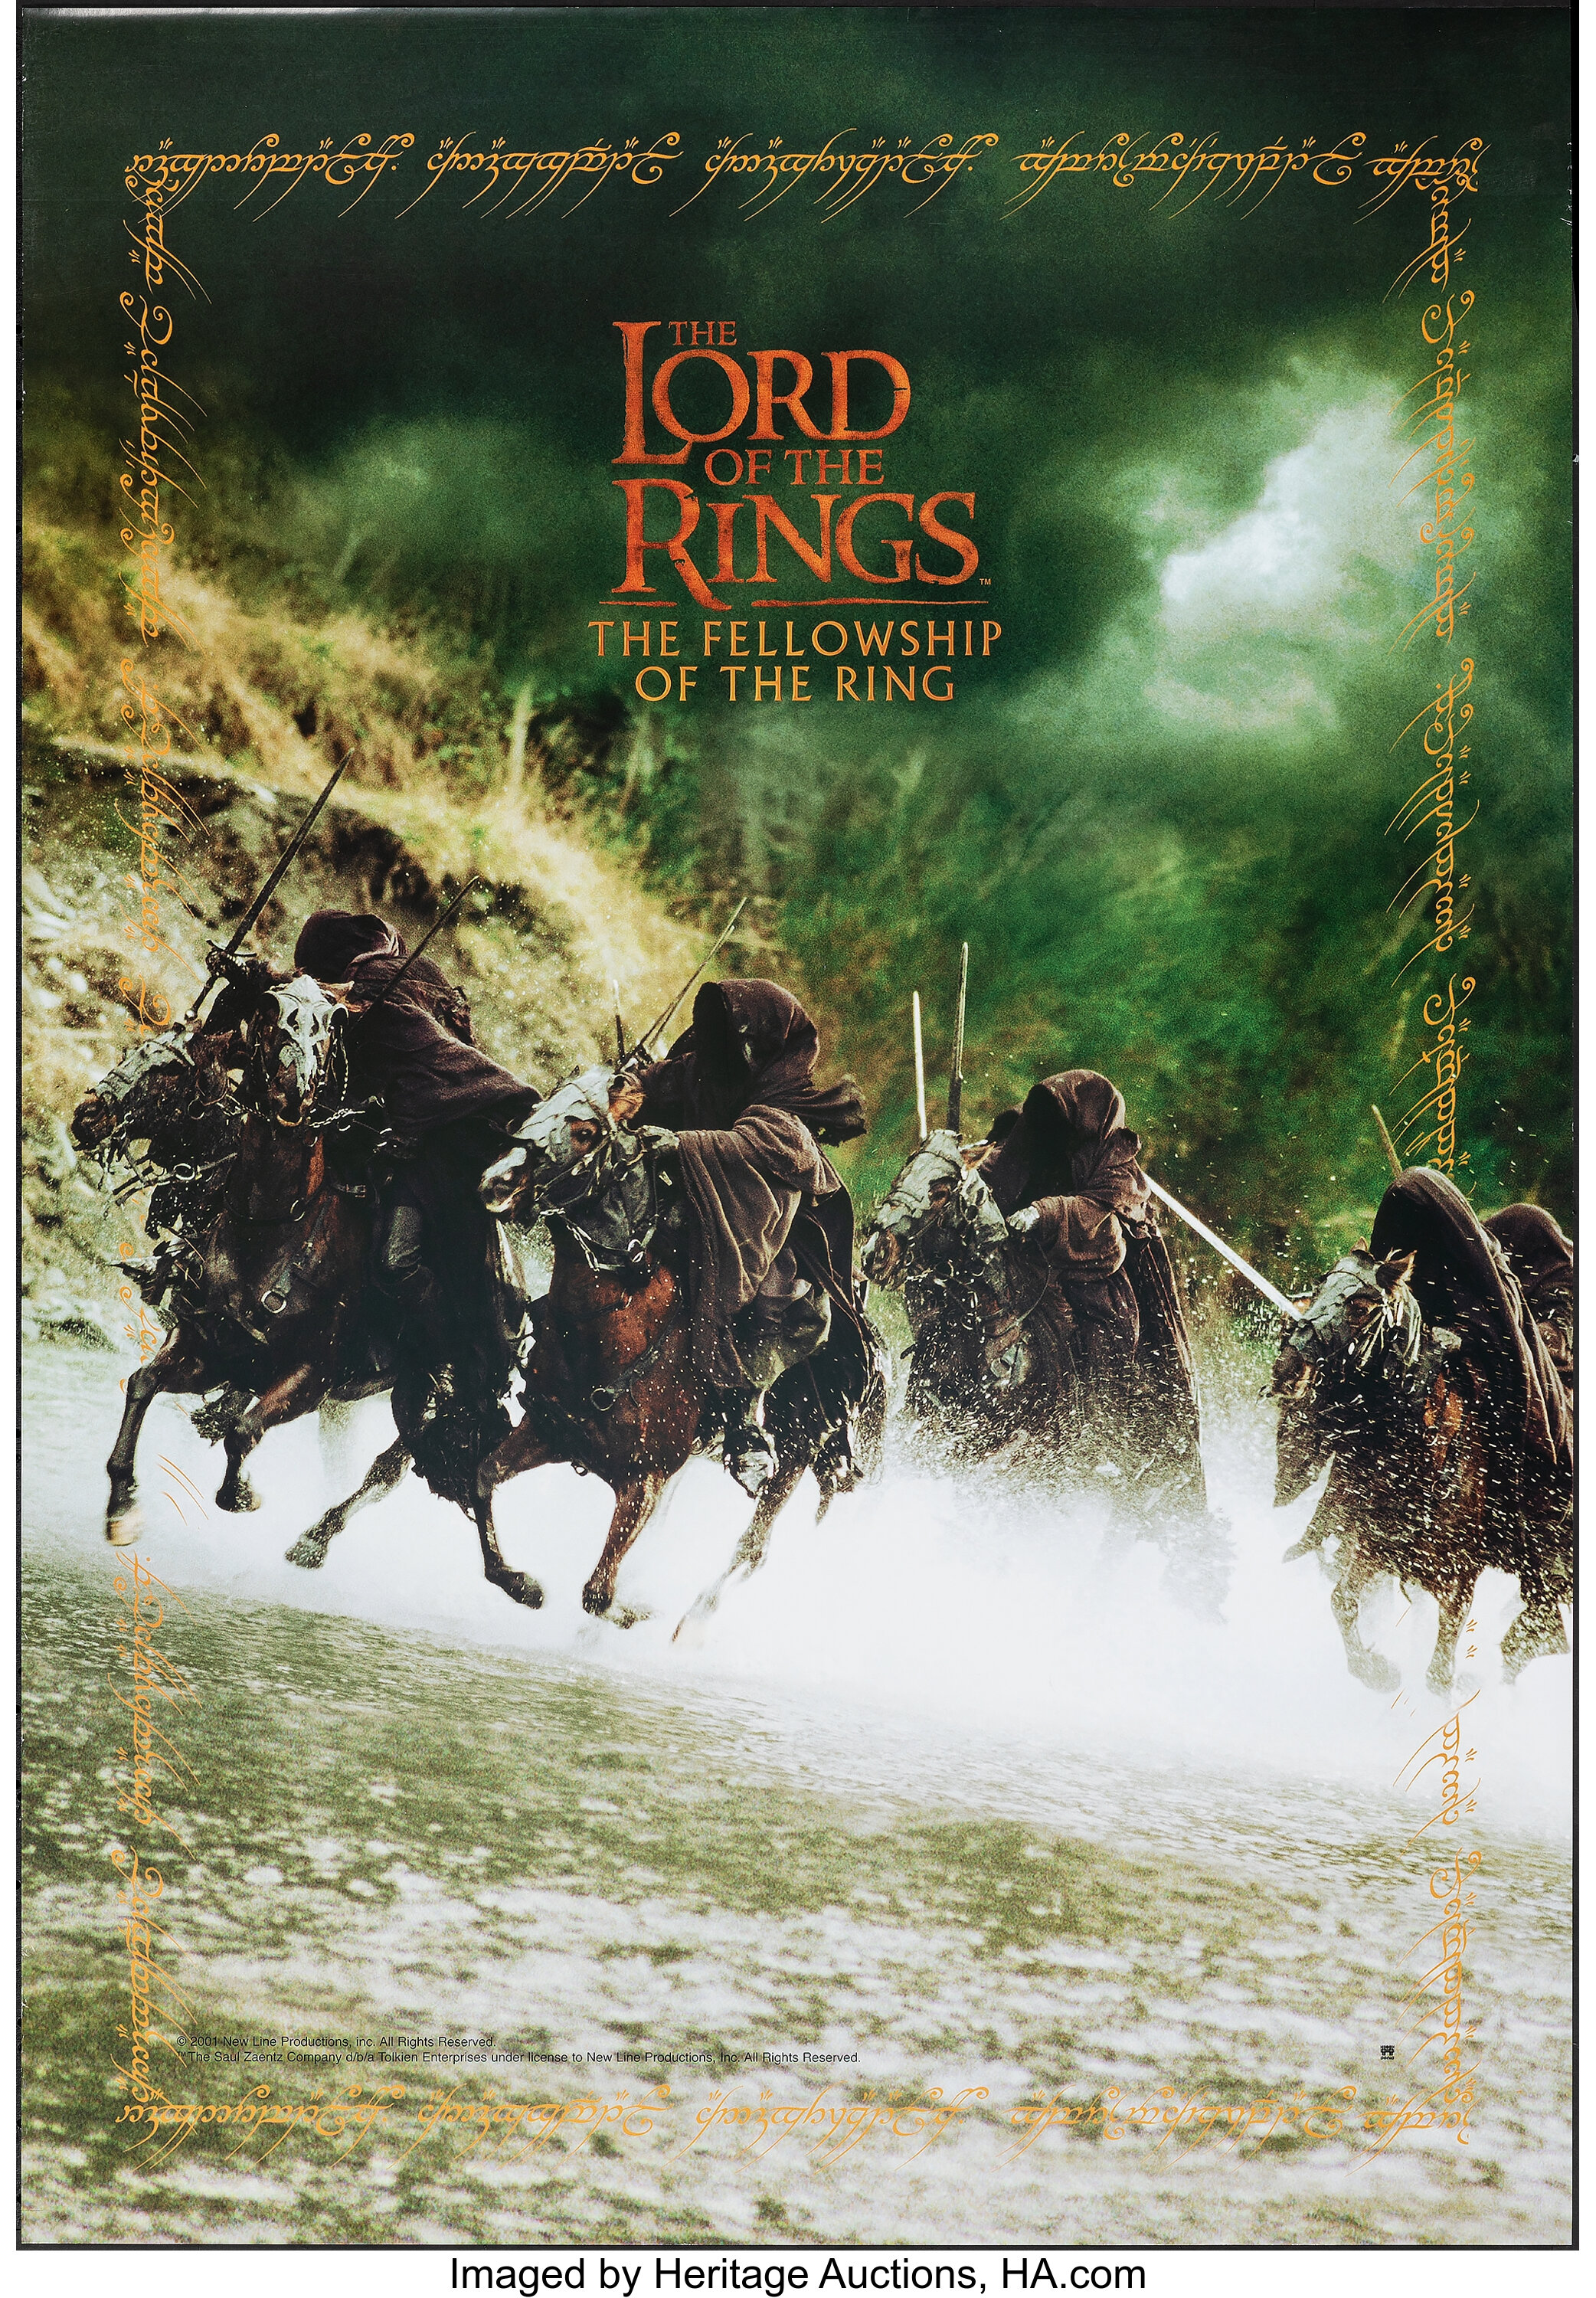 The Lord of the Rings: The Fellowship of the Ring (2001) Teaser